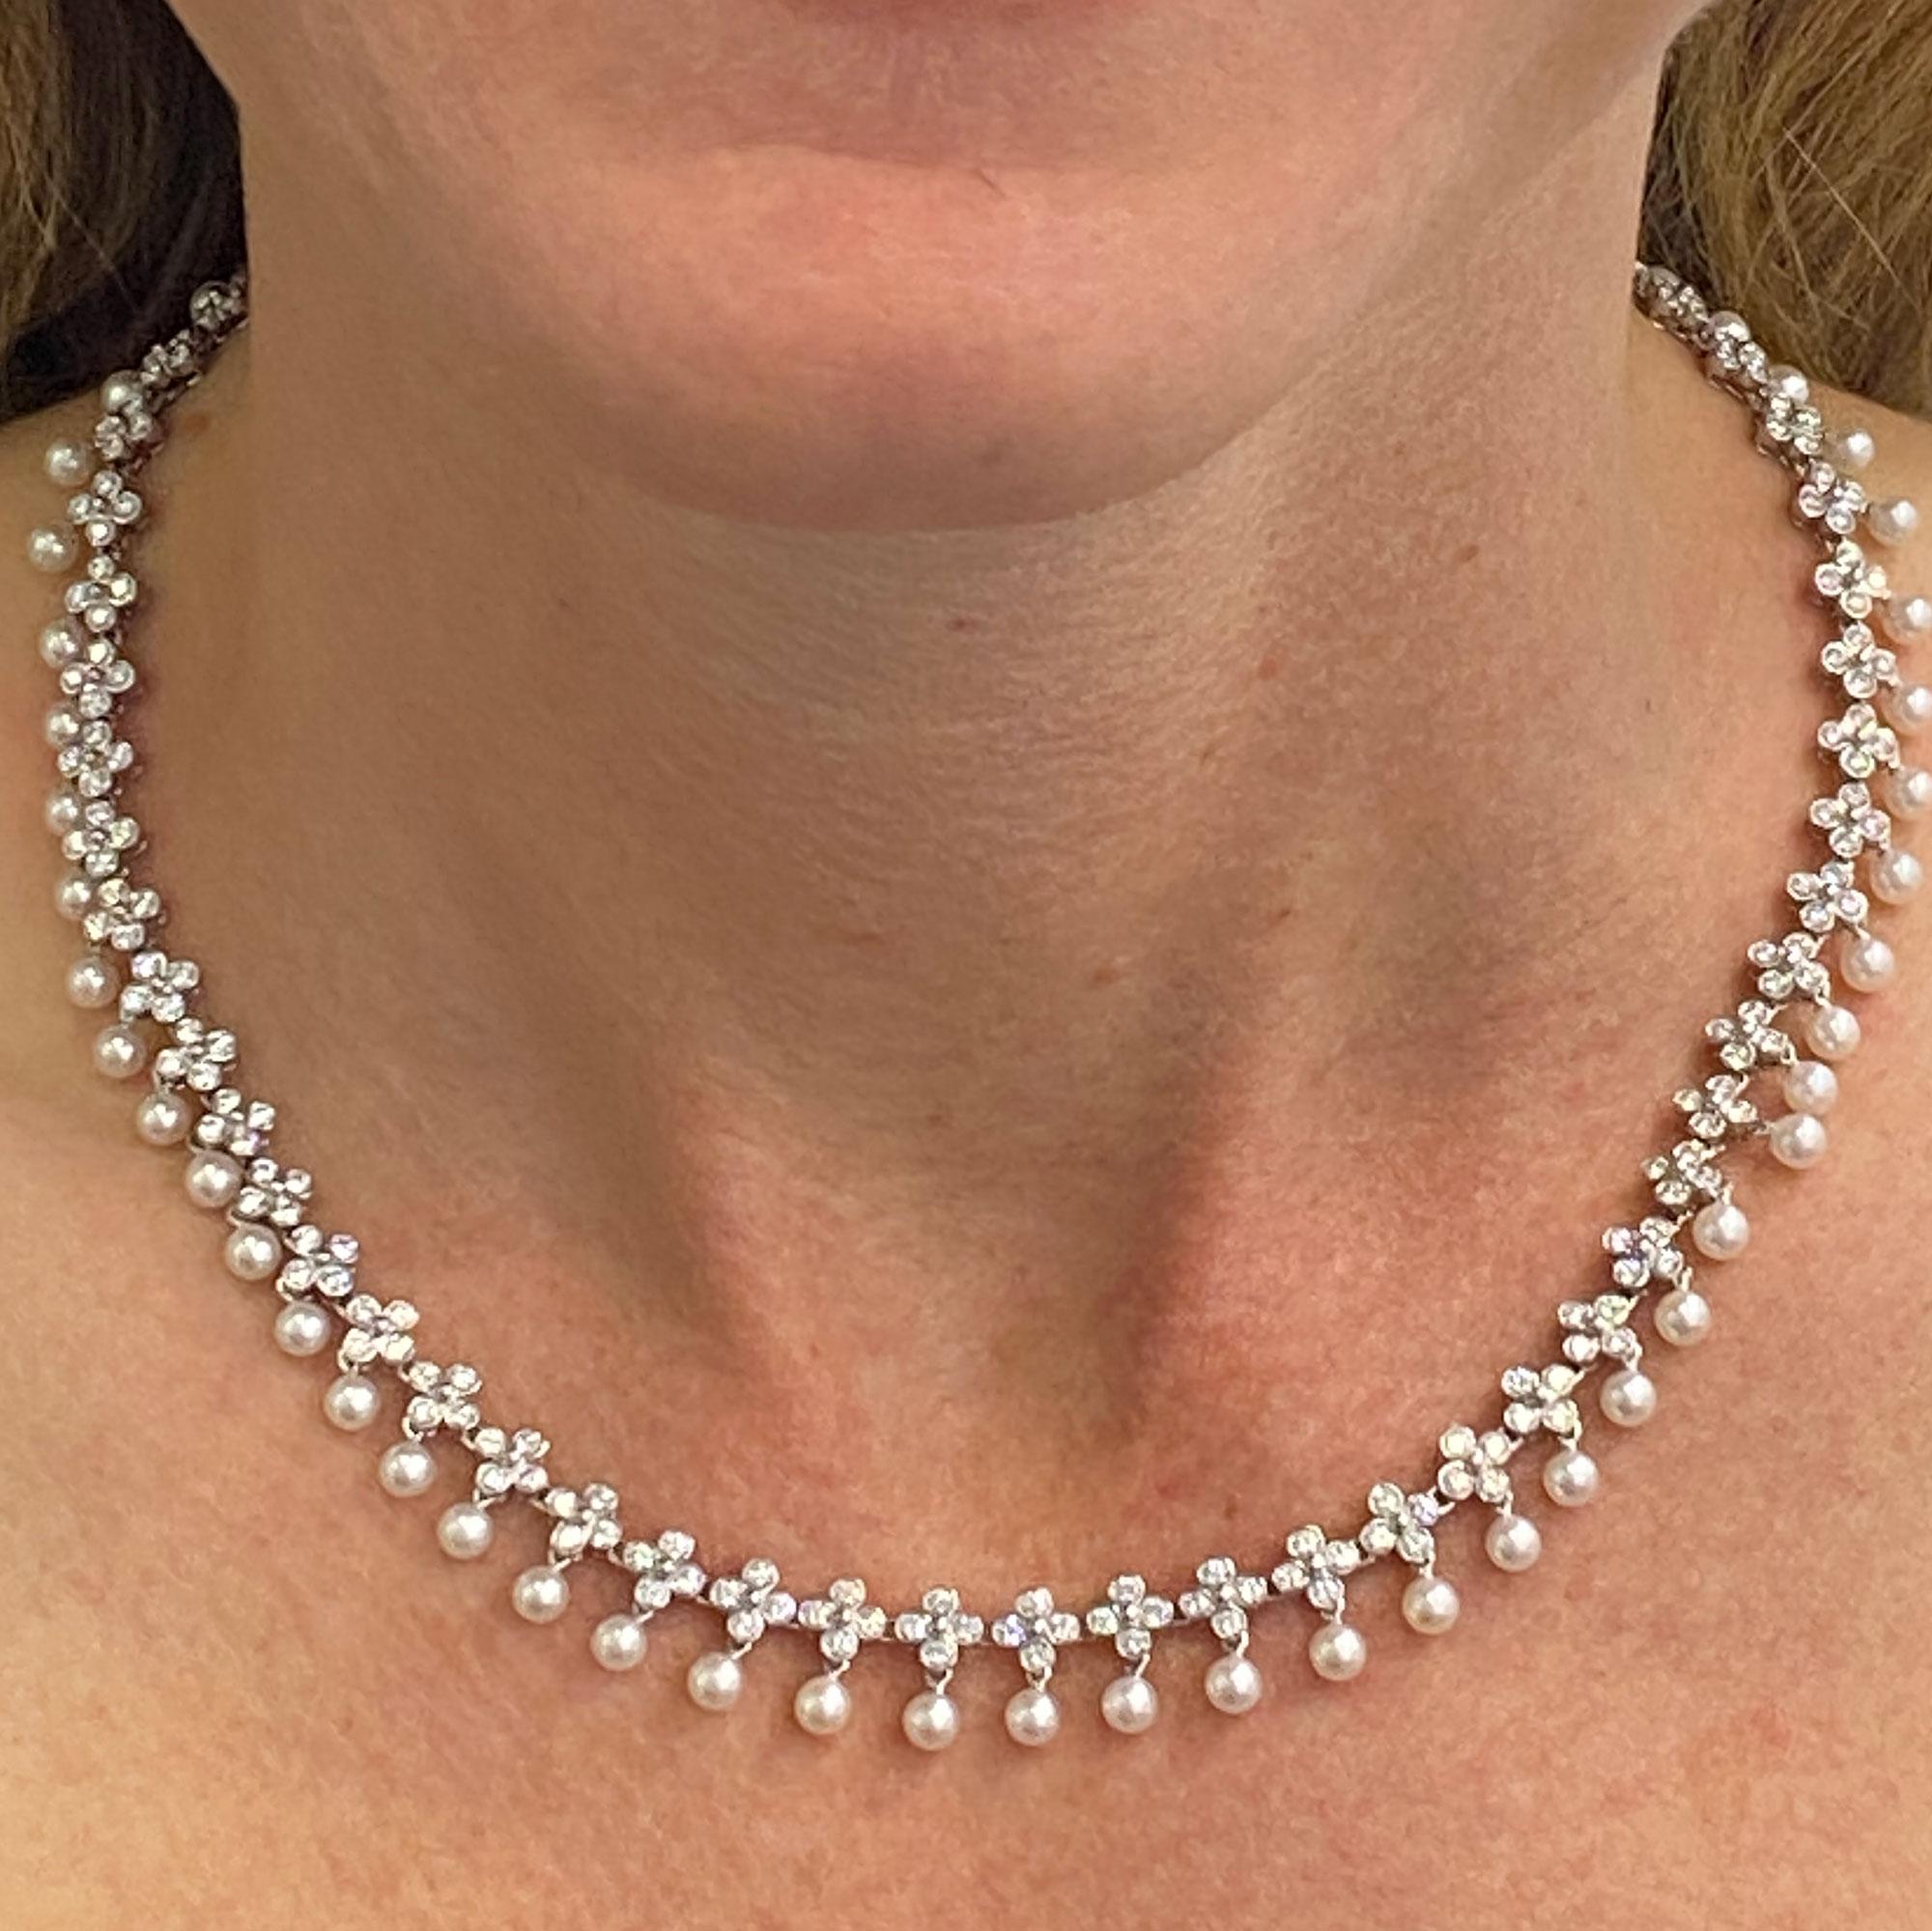 Elegant diamond and pearl drop necklace designed by Tiffany & Company. The Lace diamond necklace circa 2012 is comprised of platinum, diamonds, and pearls. Measuring 3/8 of an inch wide, each link is comprised of a clover of four round brilliant cut